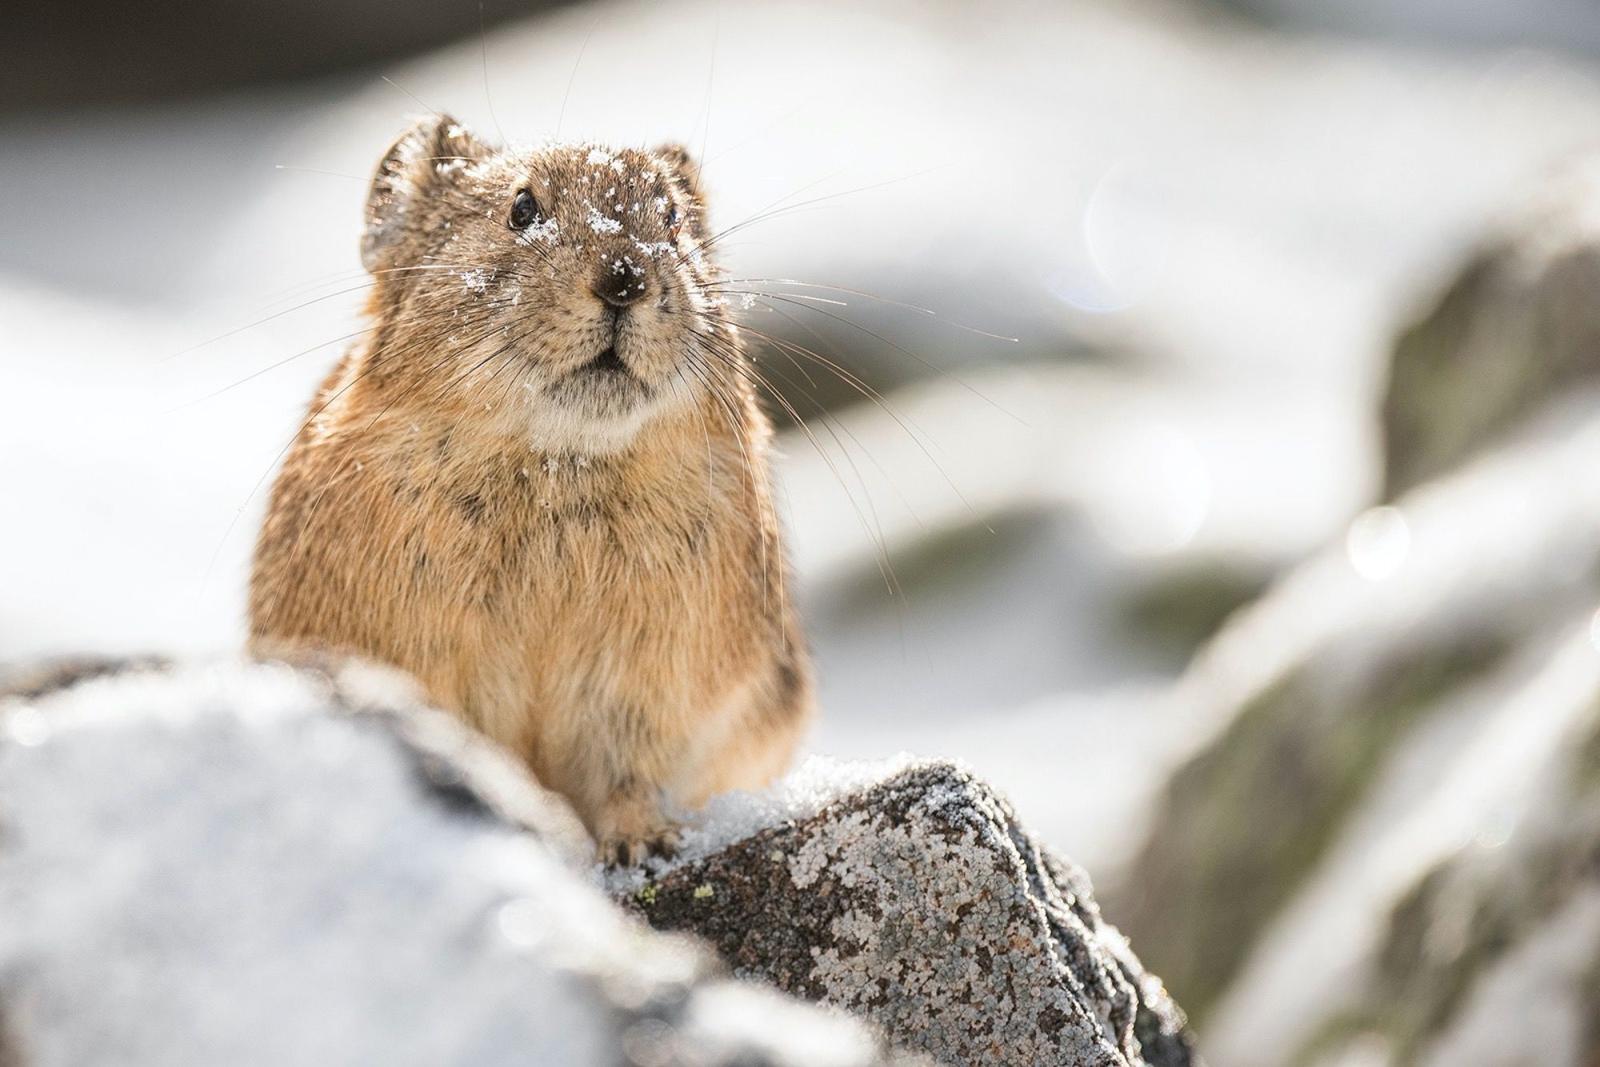 Conservation Photographer and Researcher Focuses on Pikas